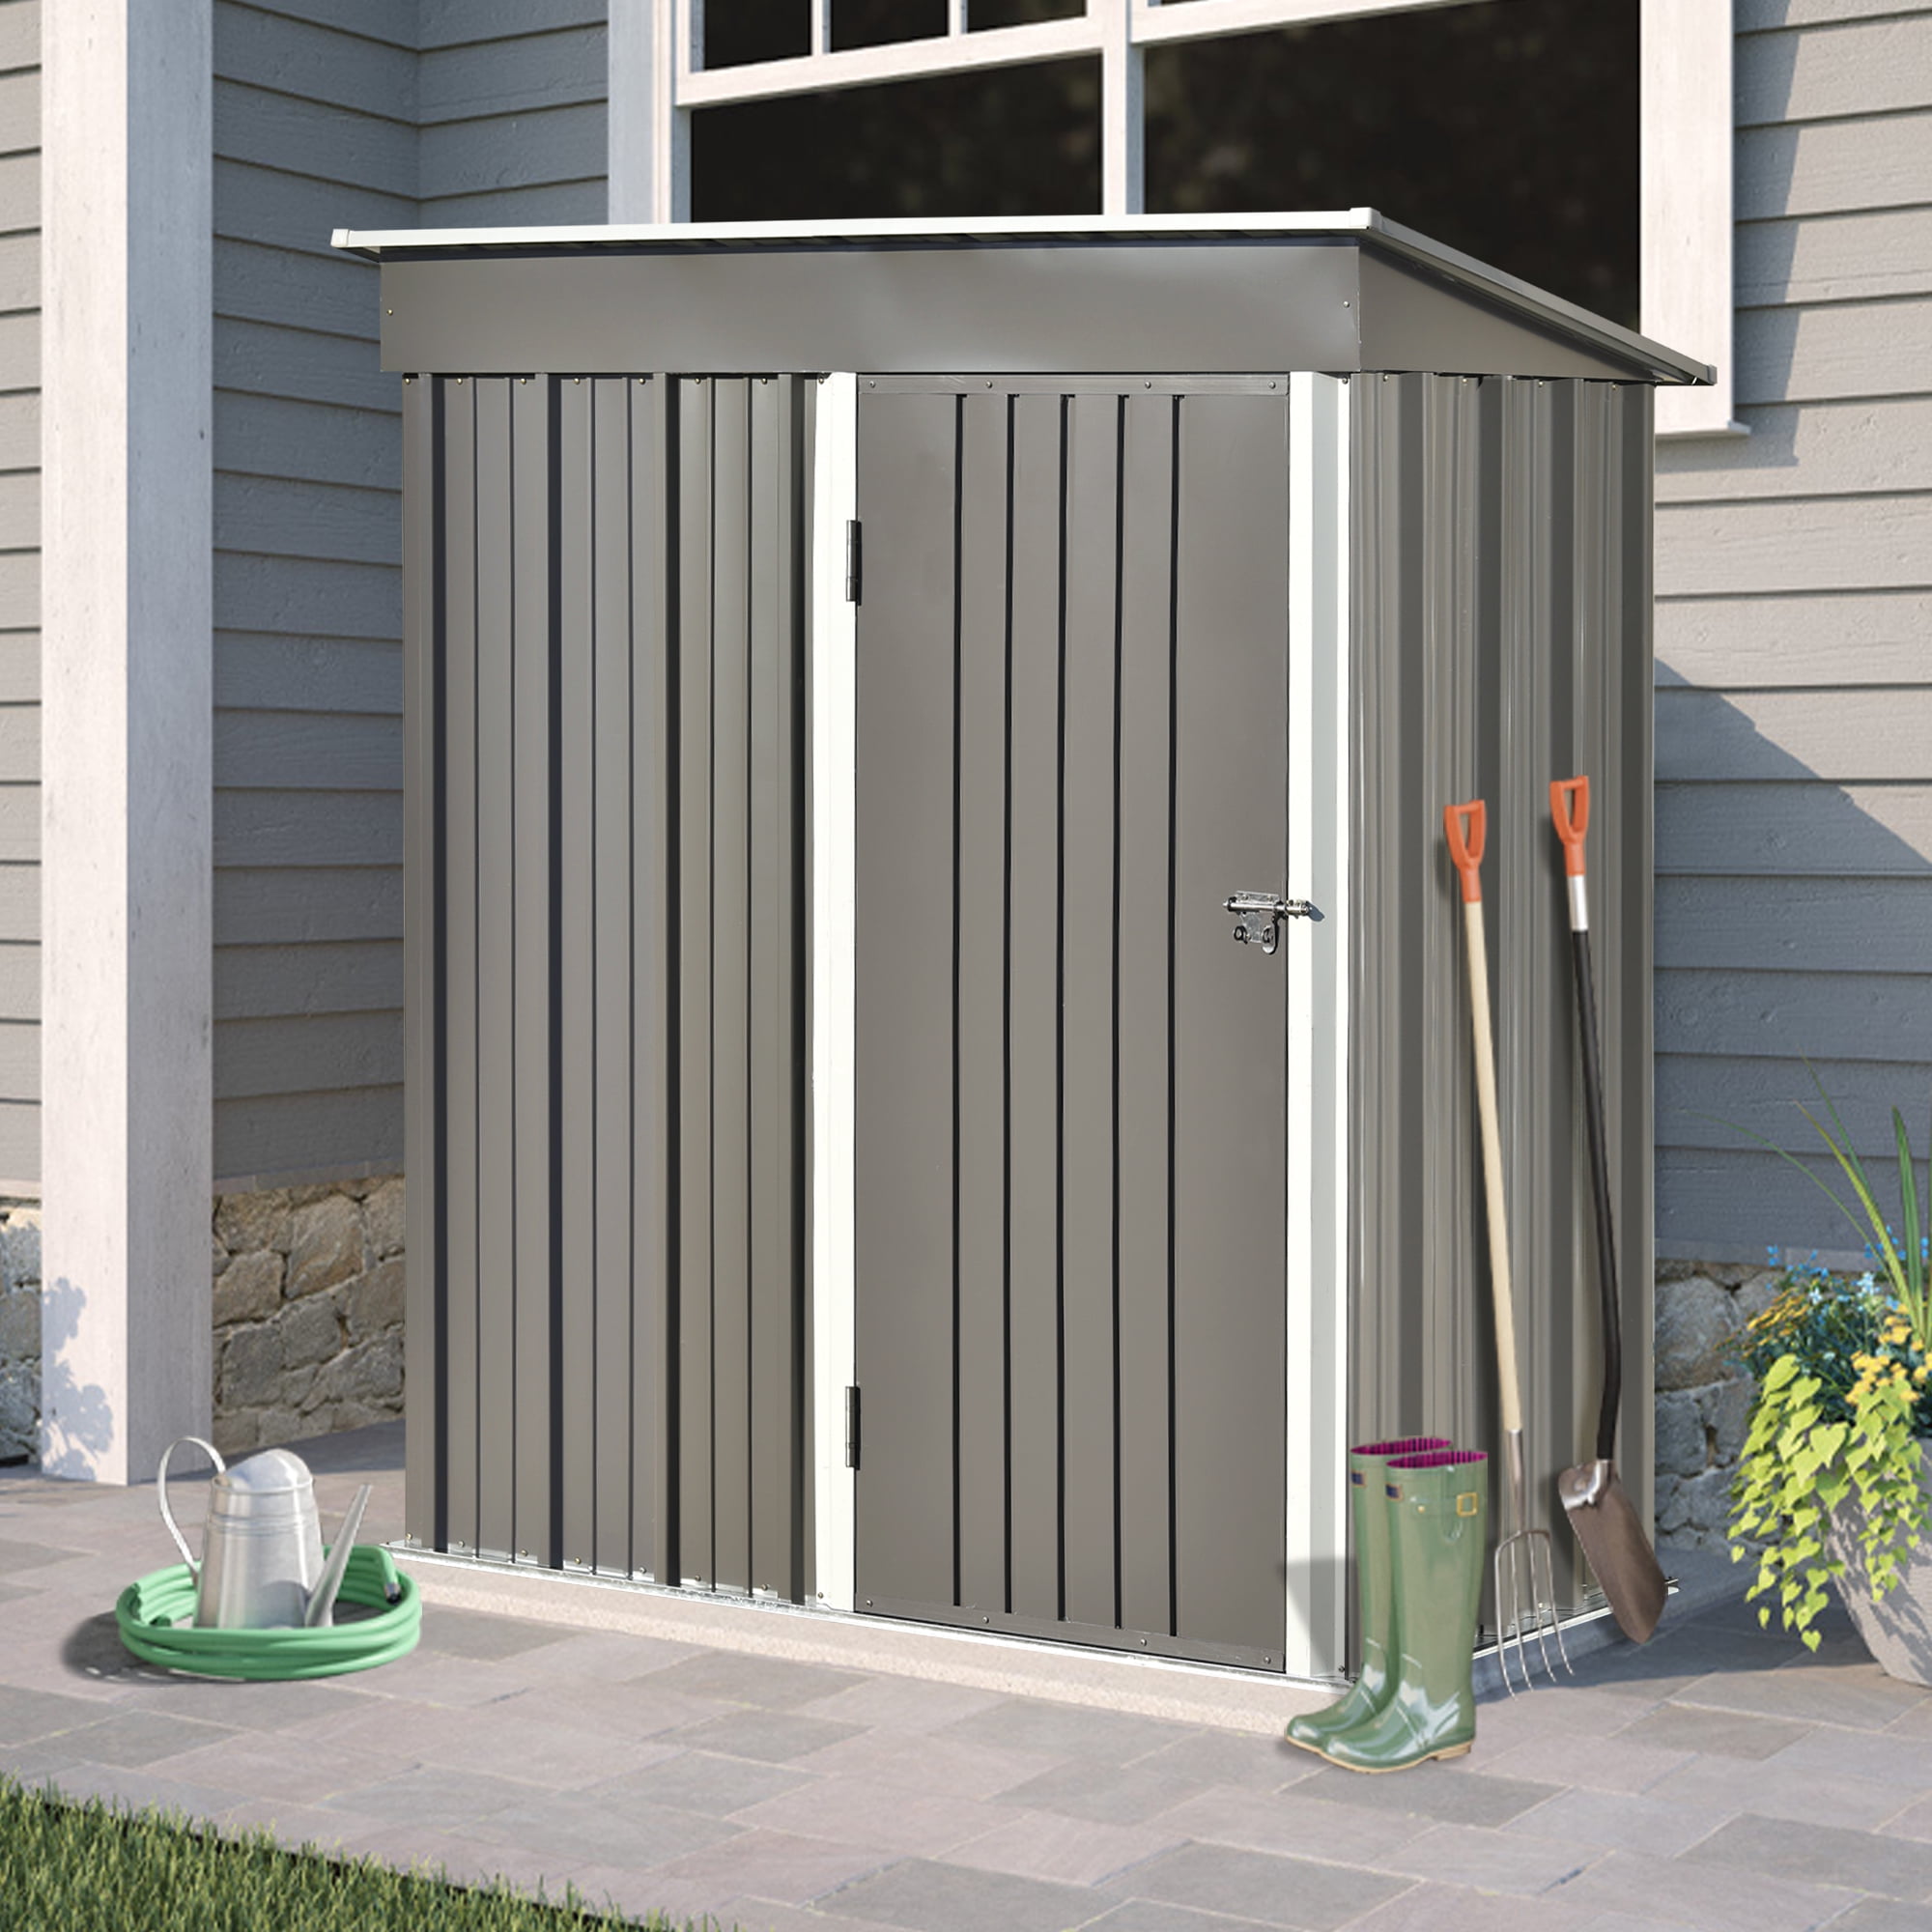 Outsunny 9' x 4' Metal Garden Storage Shed Tool House with Sliding Door  Spacious Layout for Backyard, Lawn Dark Gray